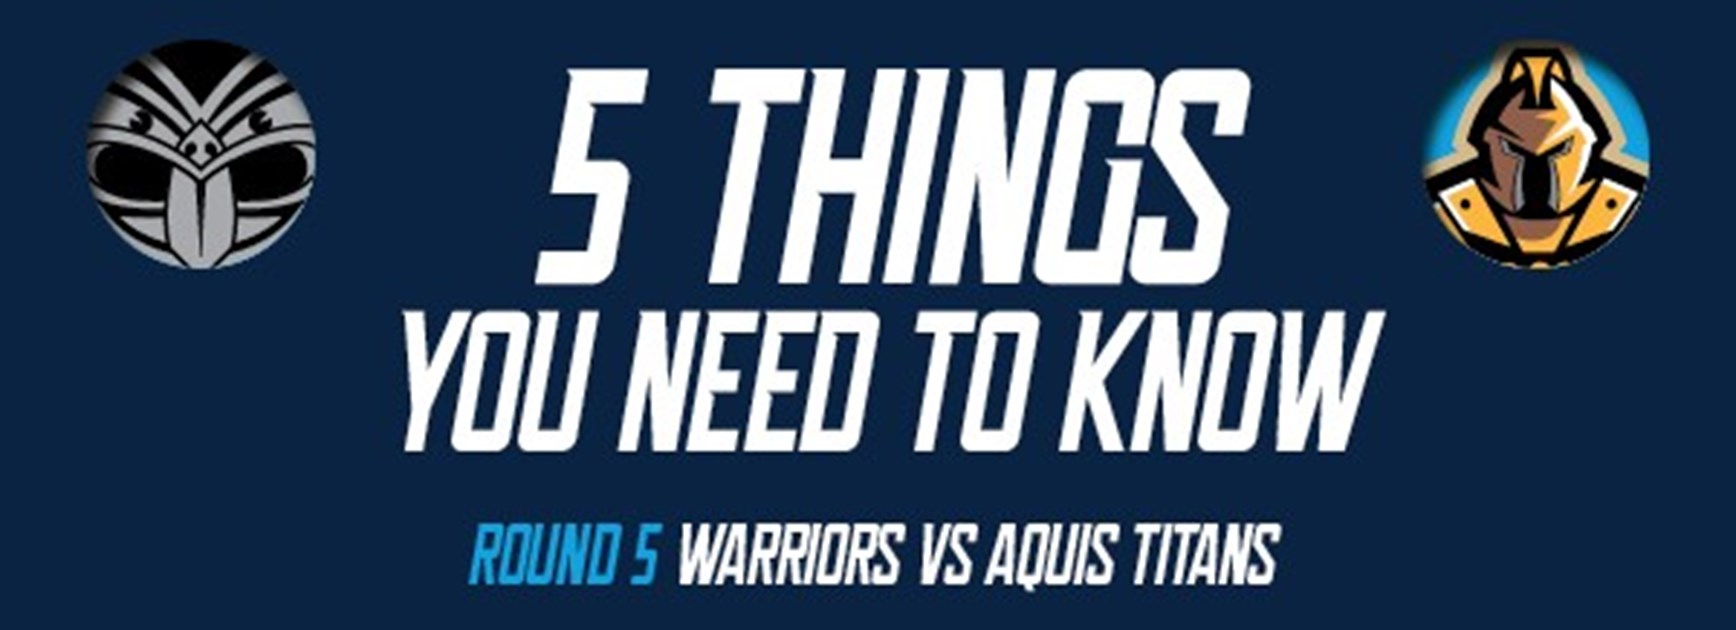 5 Things You Need to Know